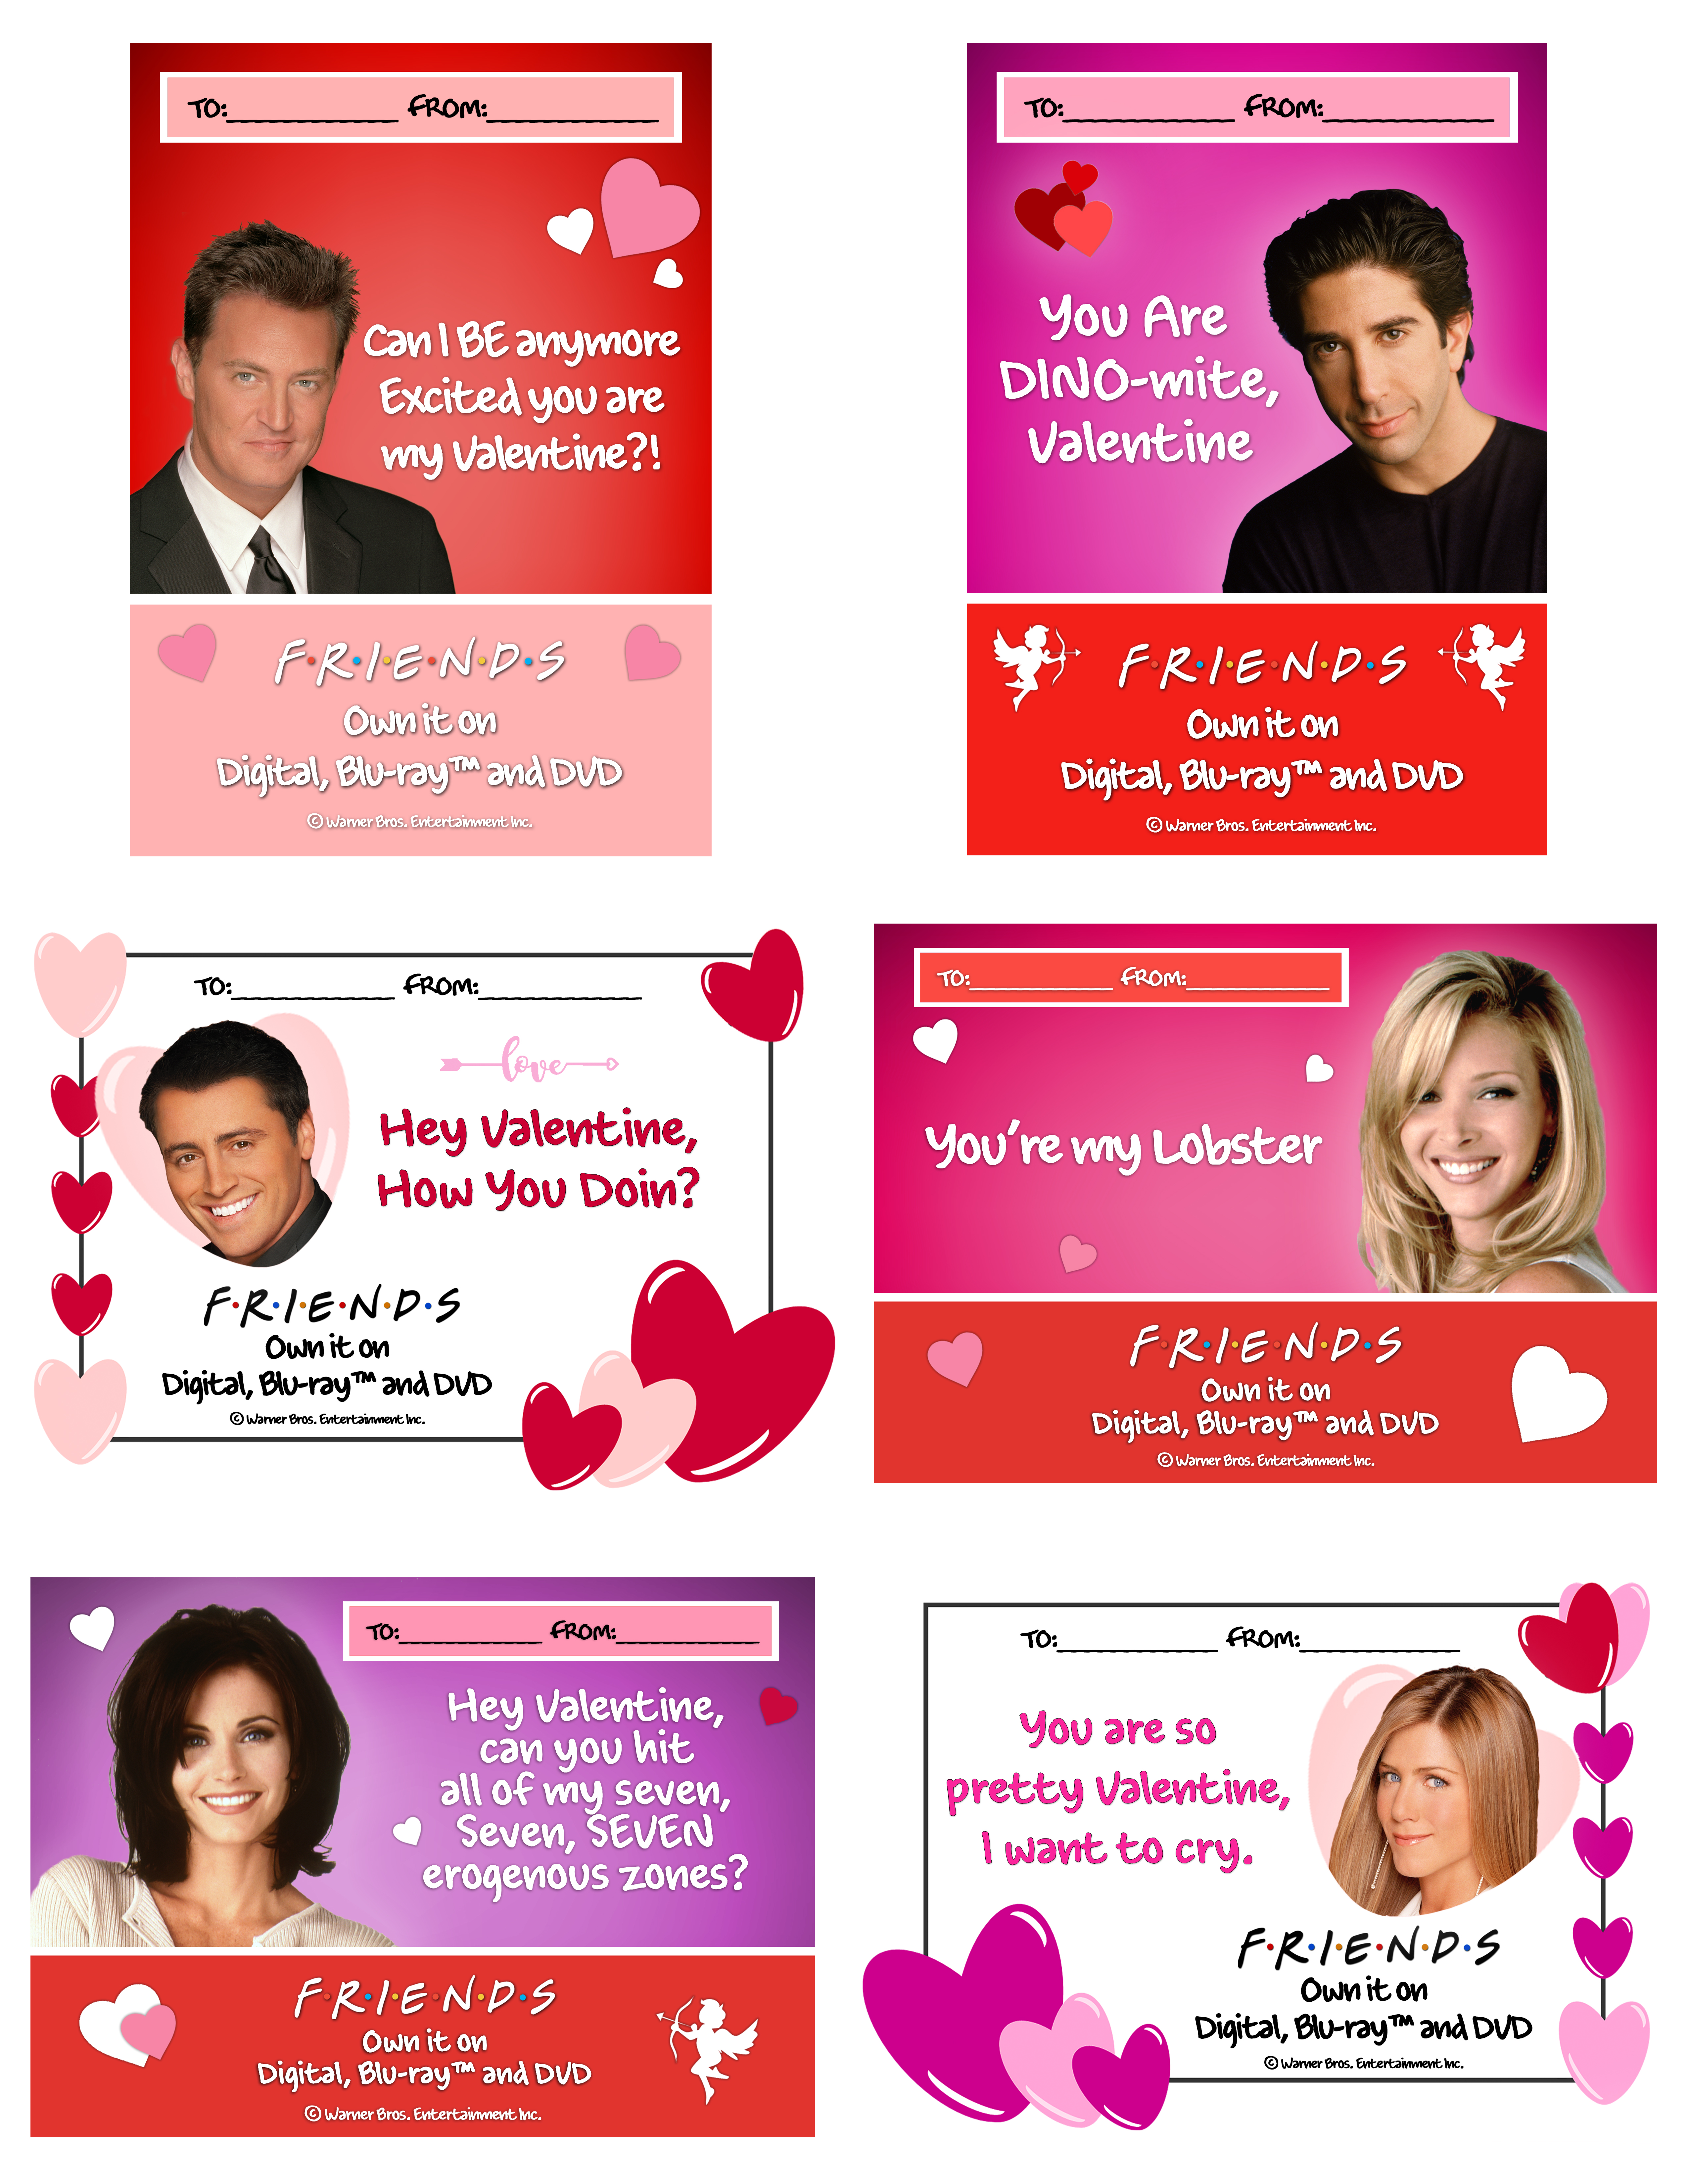 Free printable Valentine's Day Cards and virtual cards!